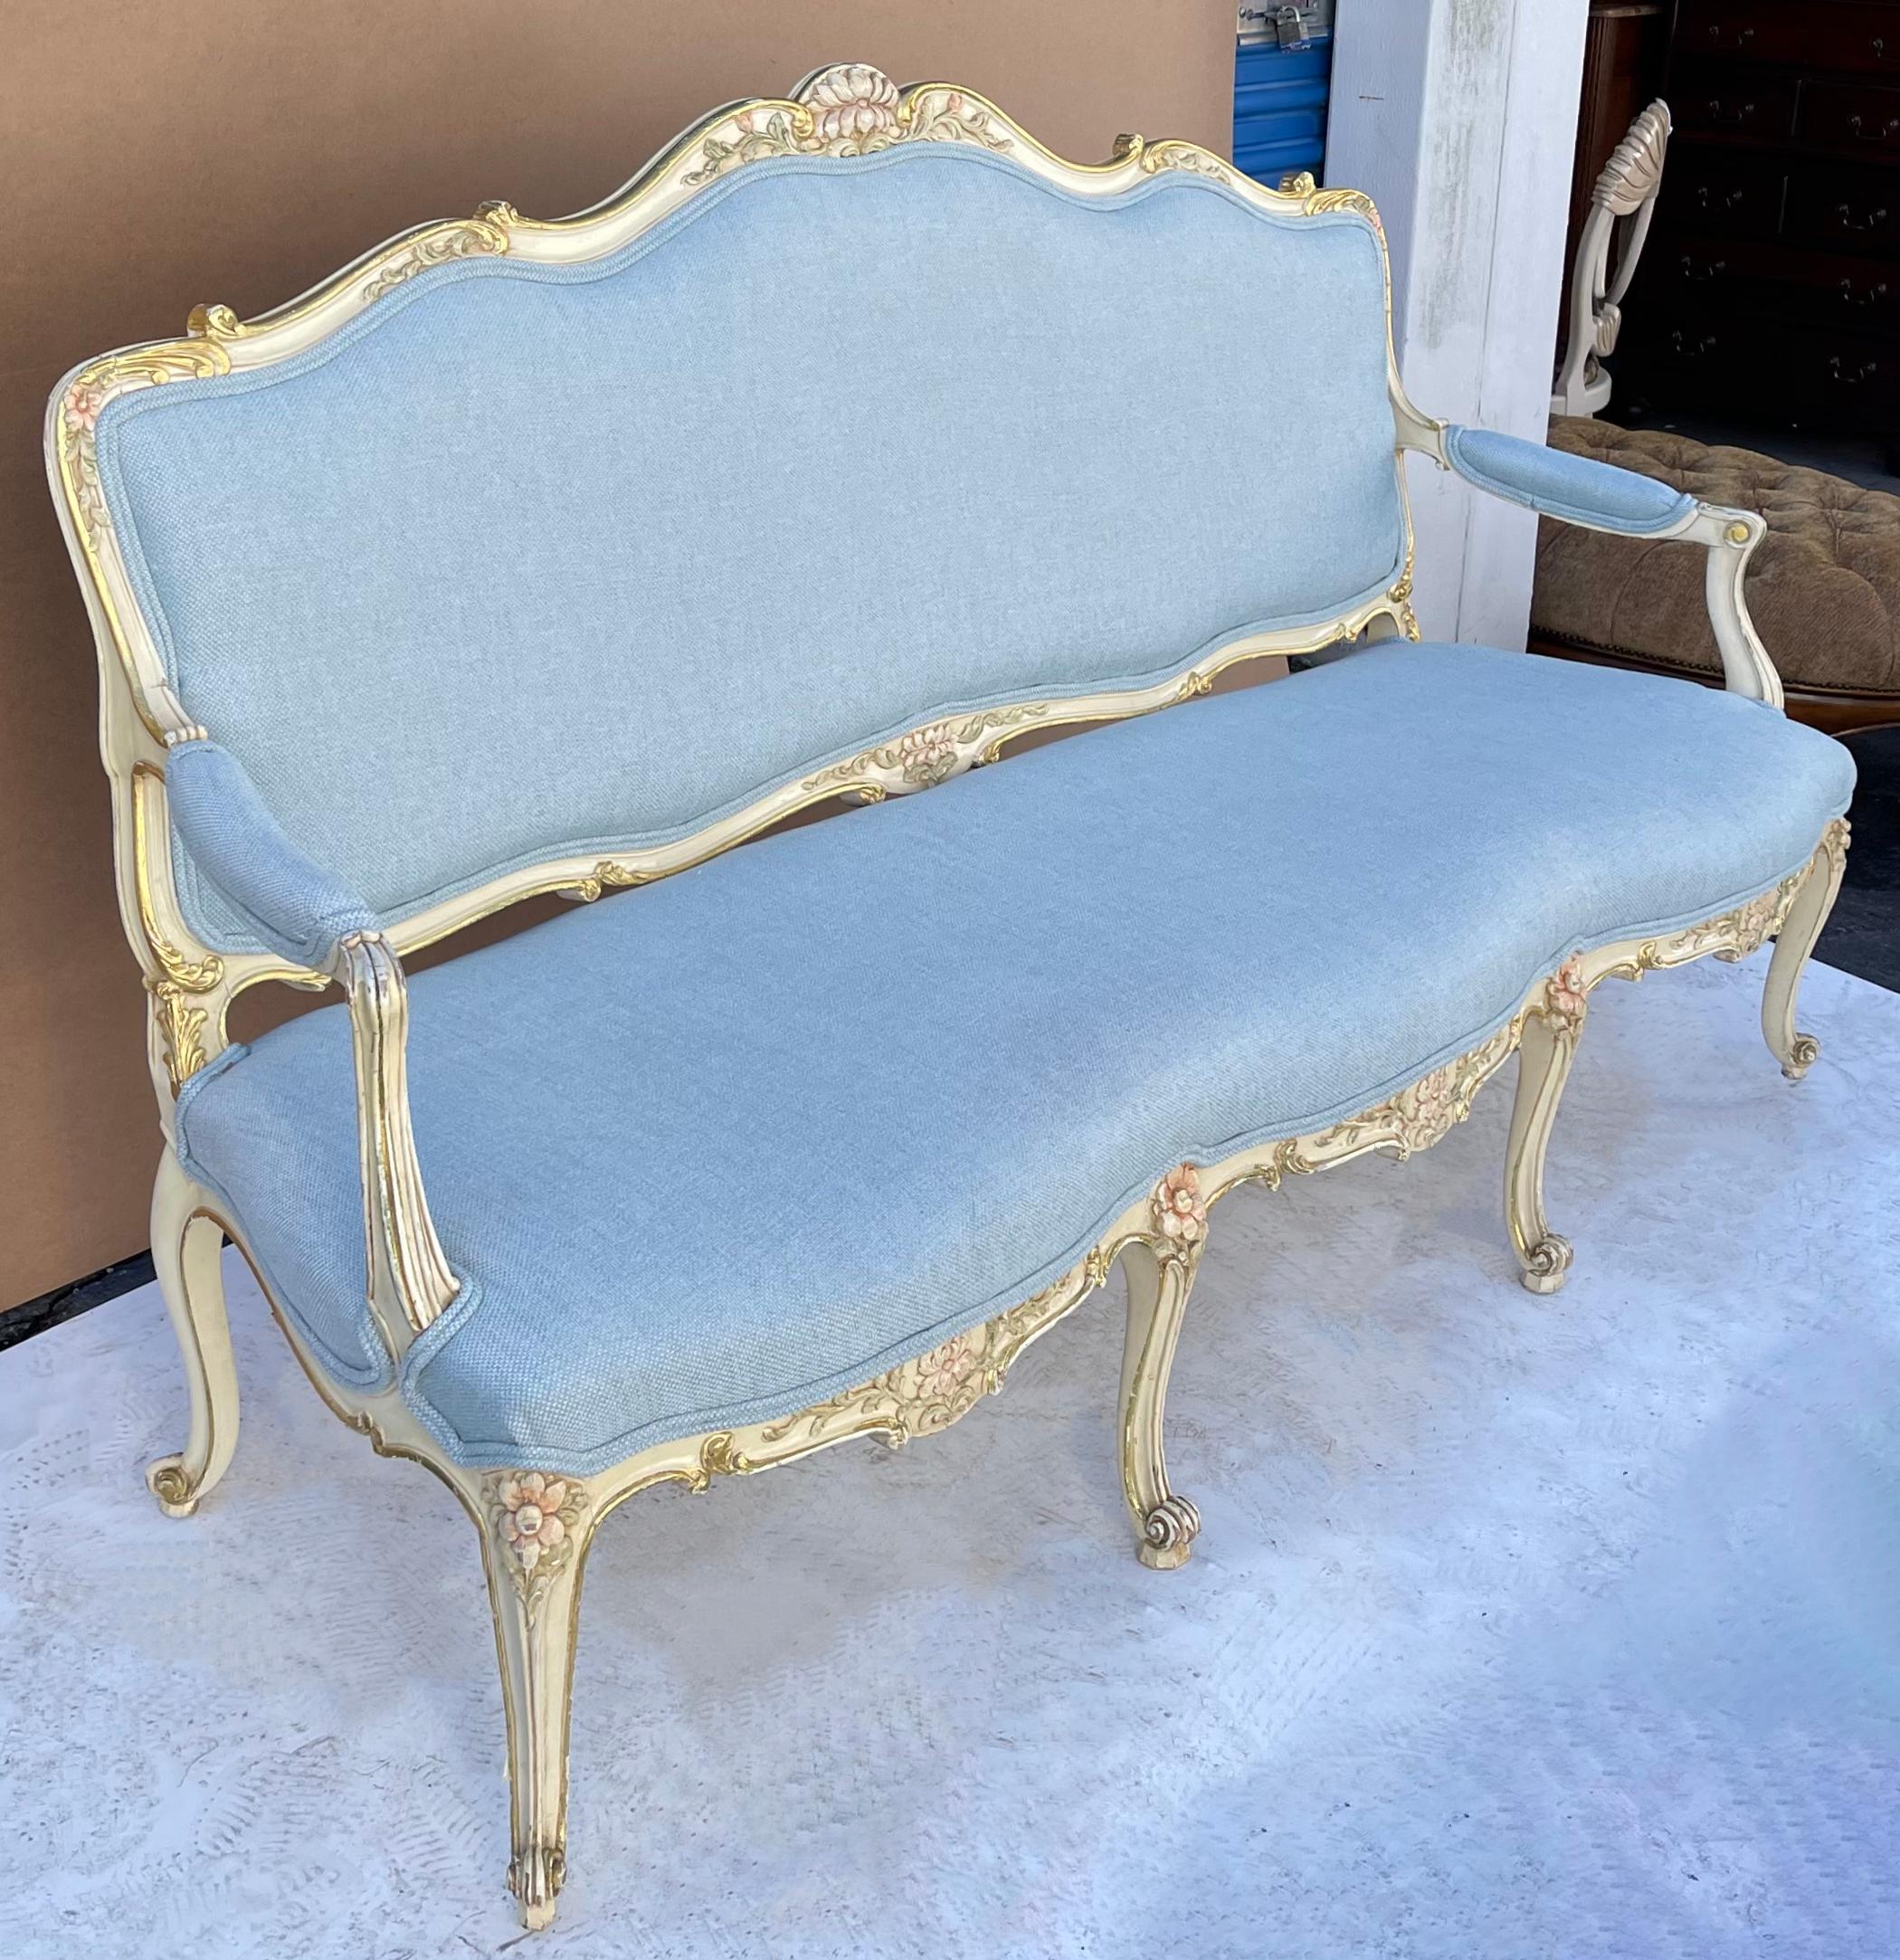 French Provincial 1950s French Style Carved and Painted Settee or Sofa in Blue Linen For Sale